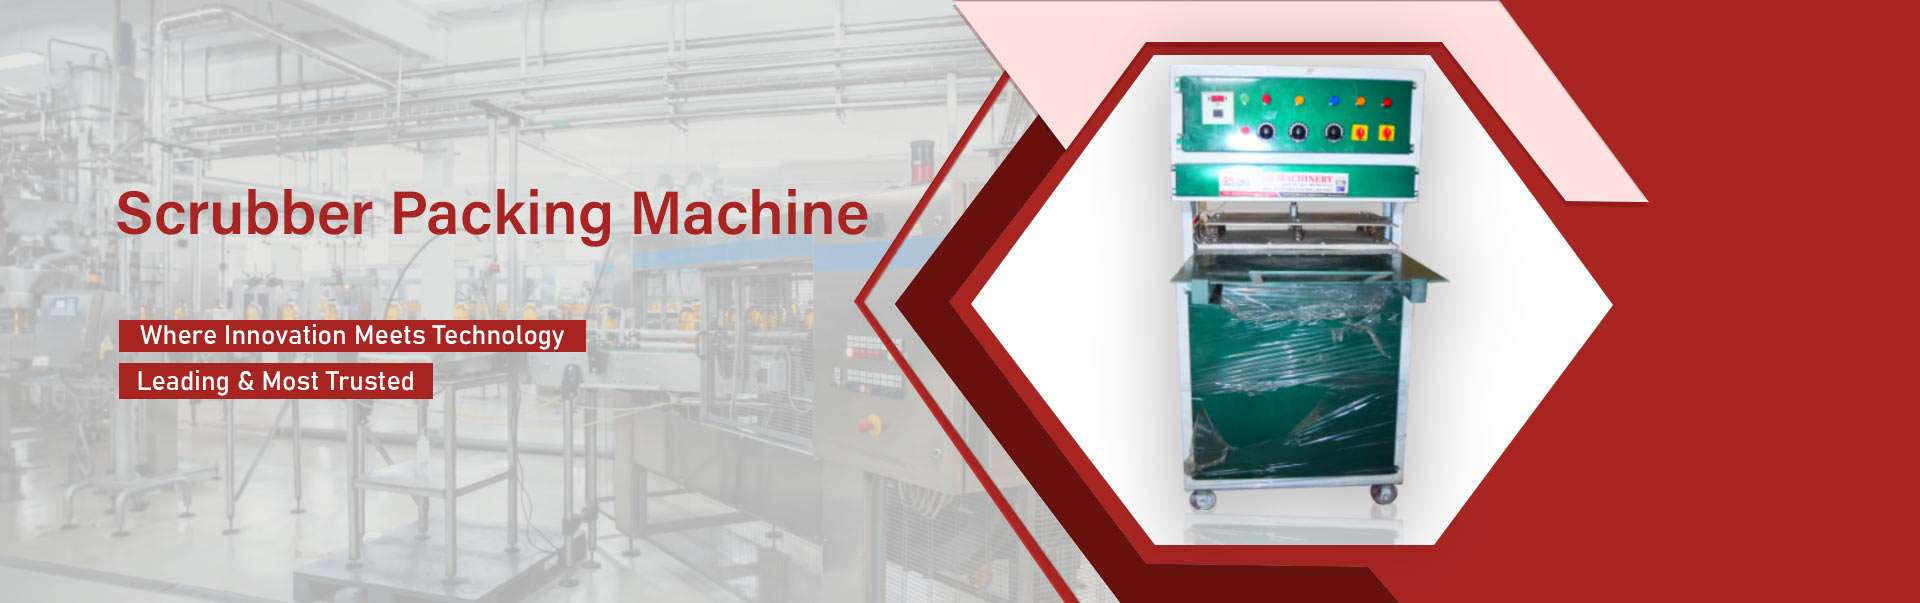  Scrubber Packing Machine Manufacturers Manufacturers in Chittoor